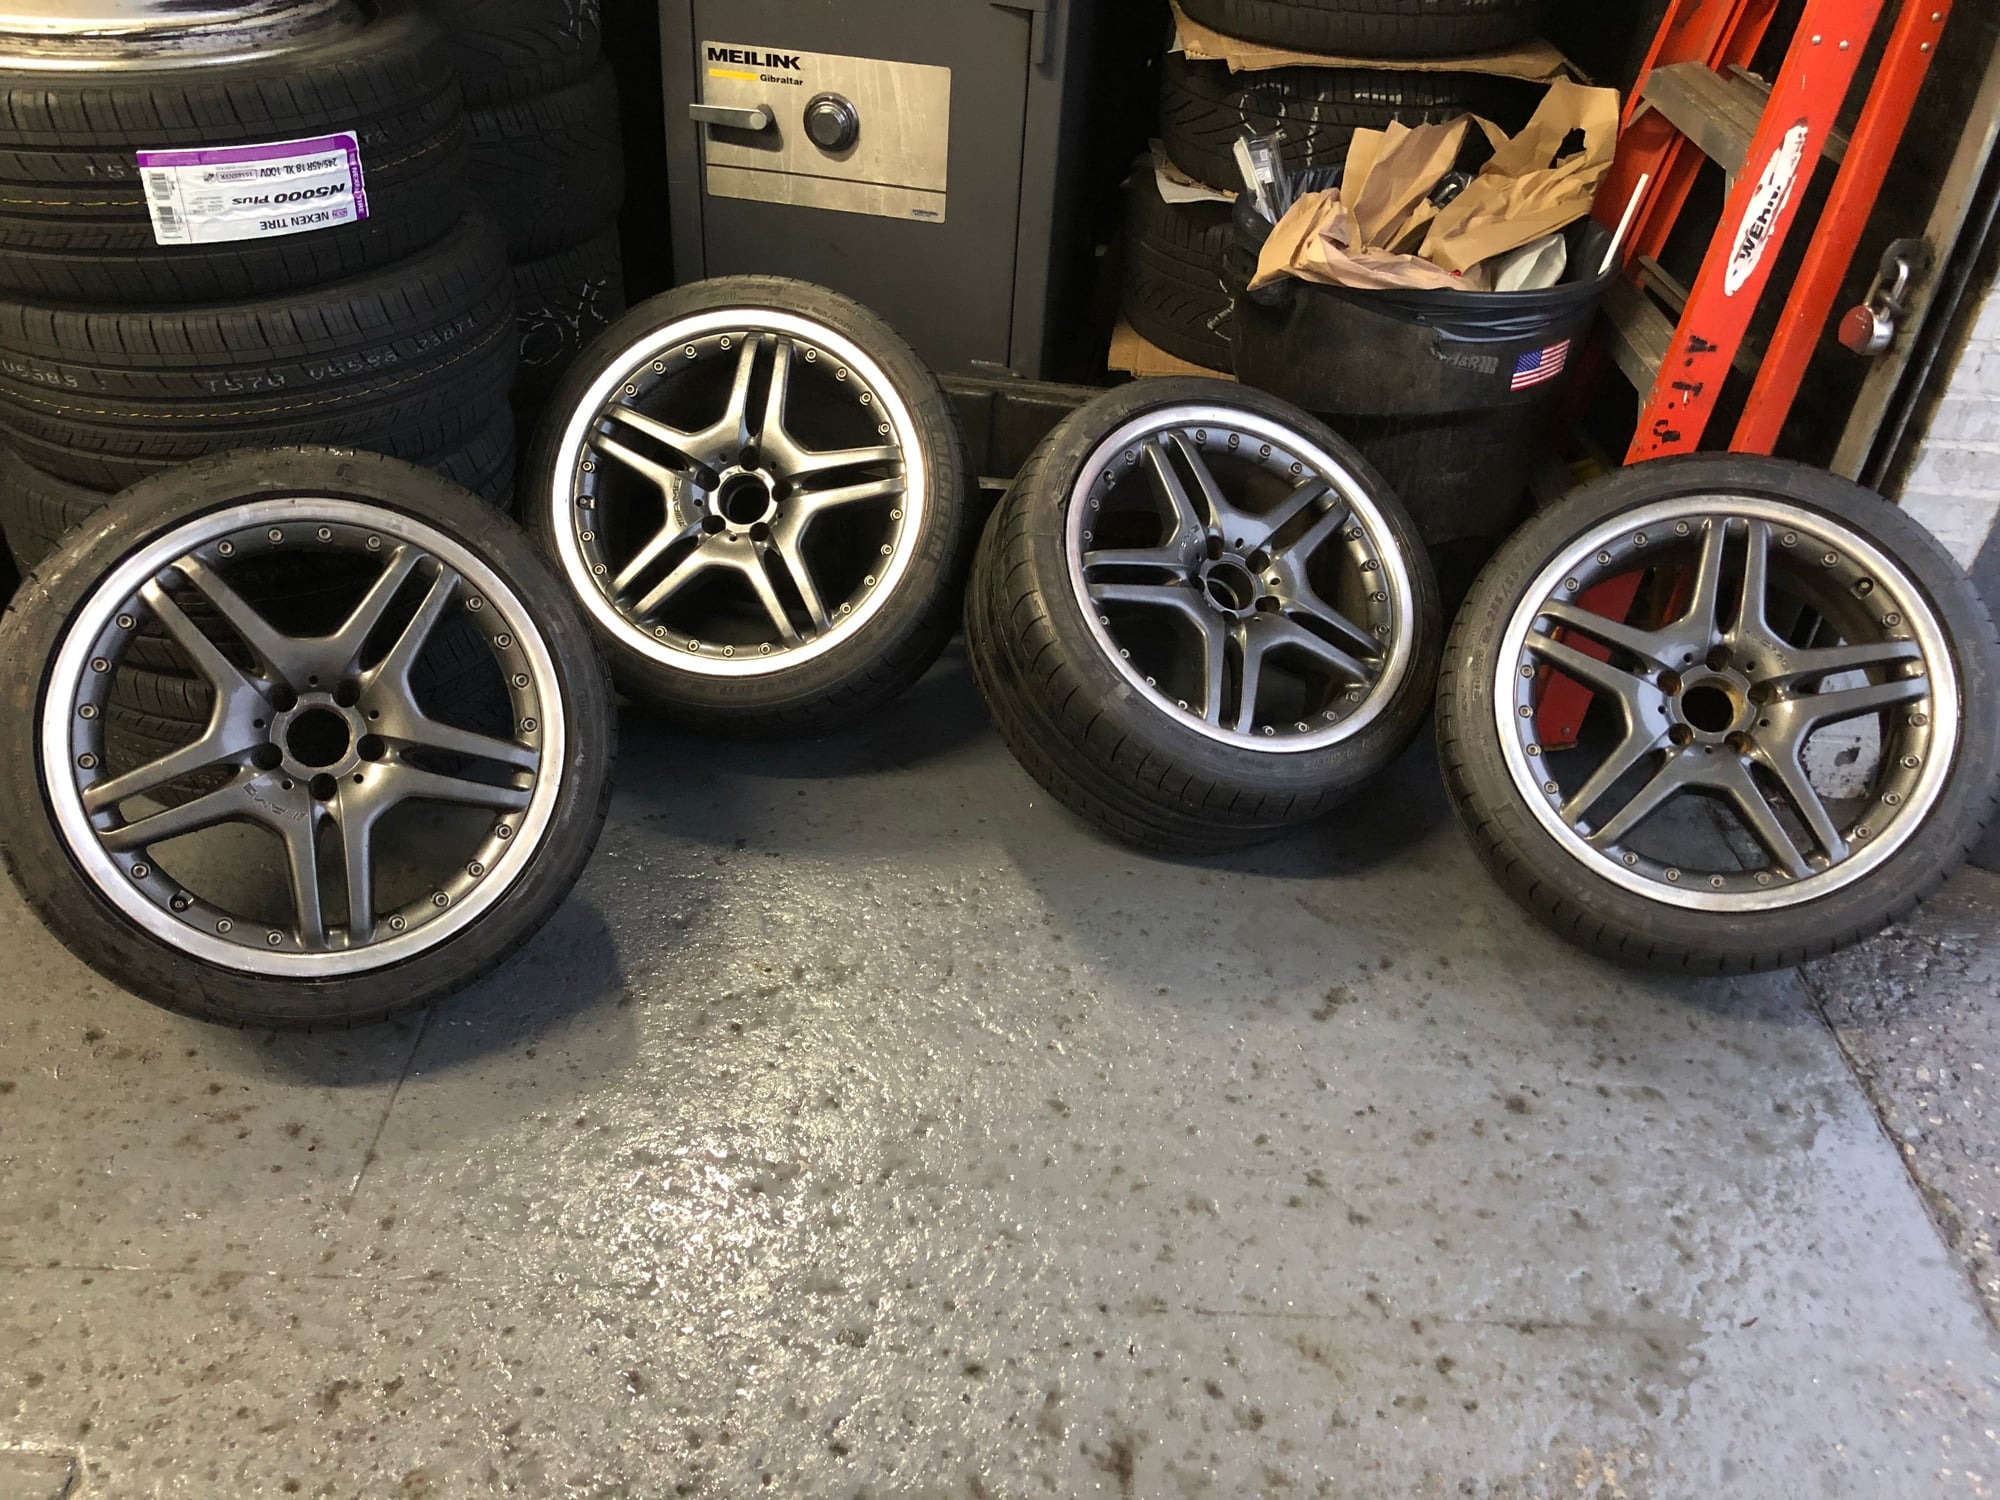 Wheels and Tires/Axles - SL65 R230 2 piece wheels OEM - Used - 2003 to 2012 Mercedes-Benz SL65 AMG - 2003 to 2006 Mercedes-Benz E55 AMG - Queens, NY 11356, United States